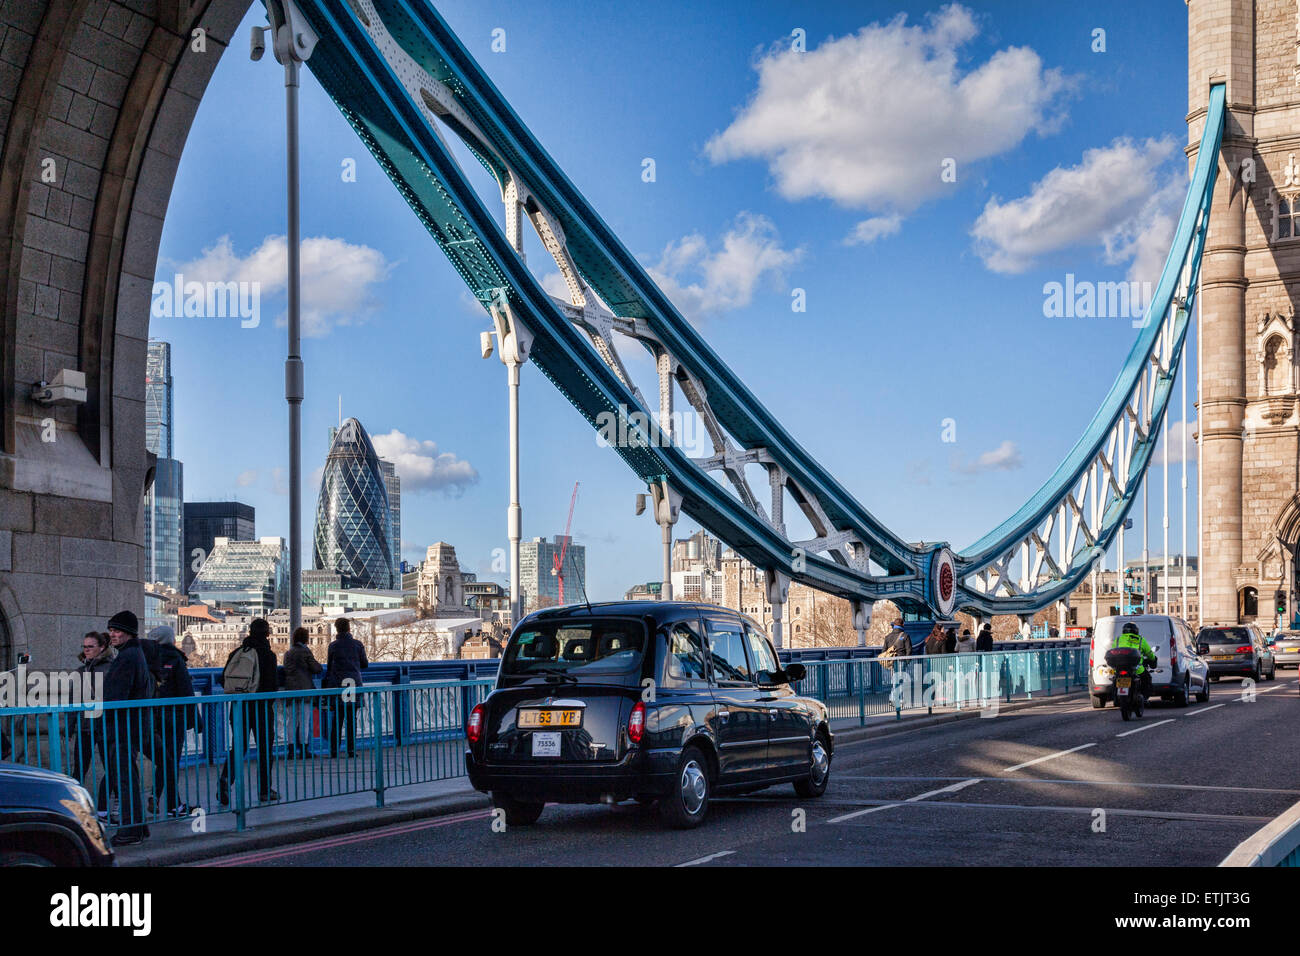 Black taxi cab on Tower Bridge on a bright sunny winter day, London, England, UK. Stock Photo